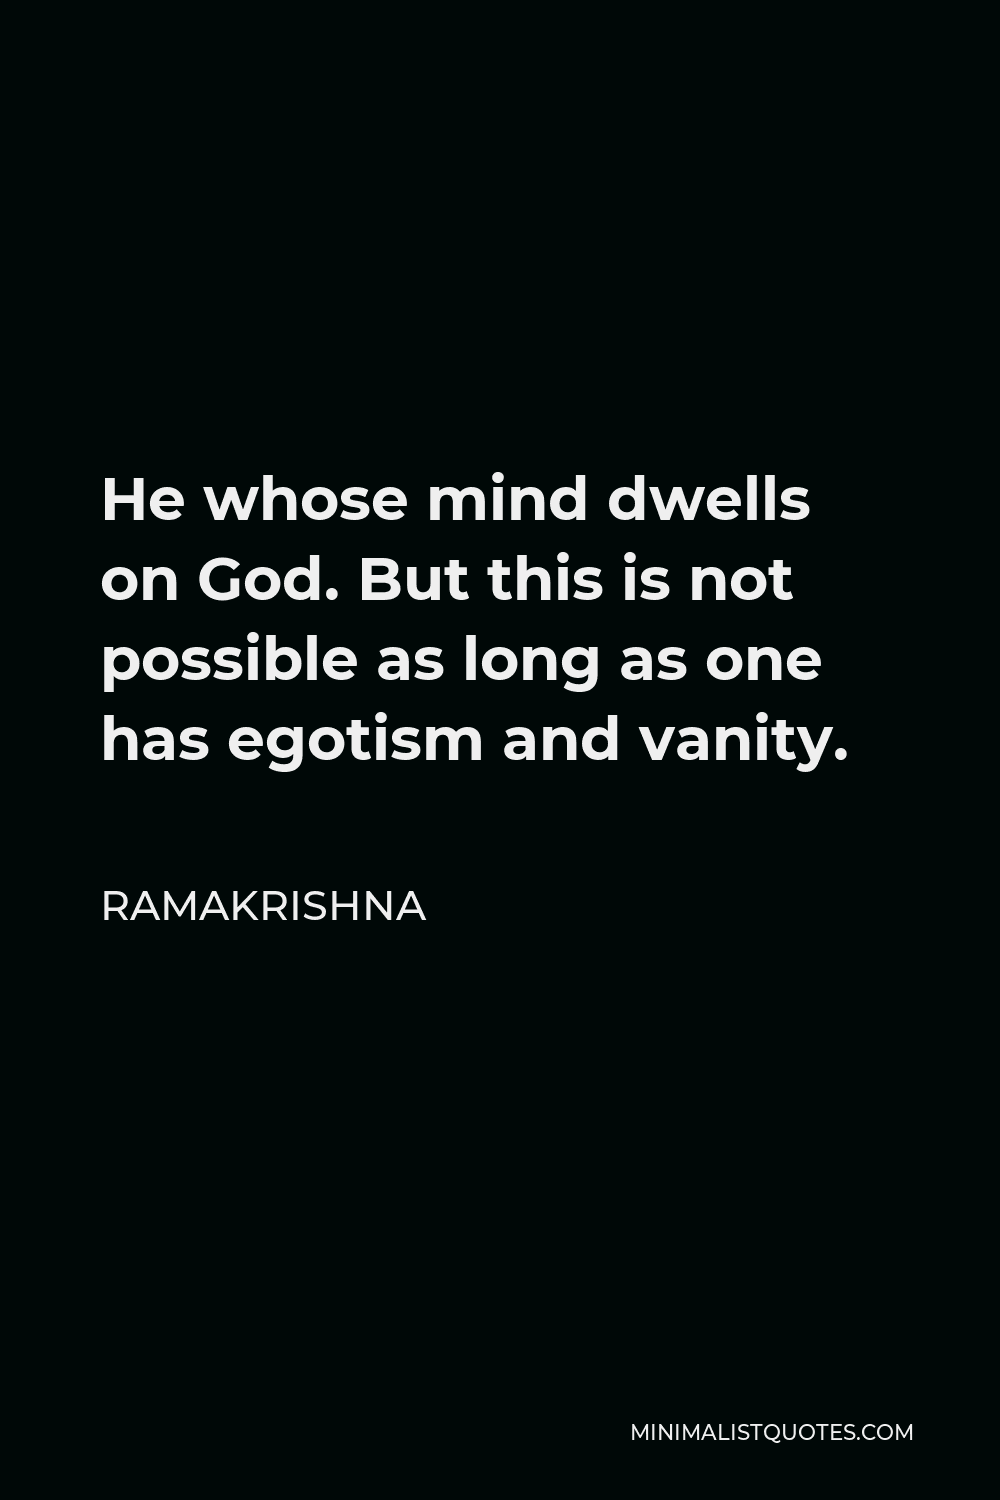 Ramakrishna Quote - He whose mind dwells on God. But this is not possible as long as one has egotism and vanity.